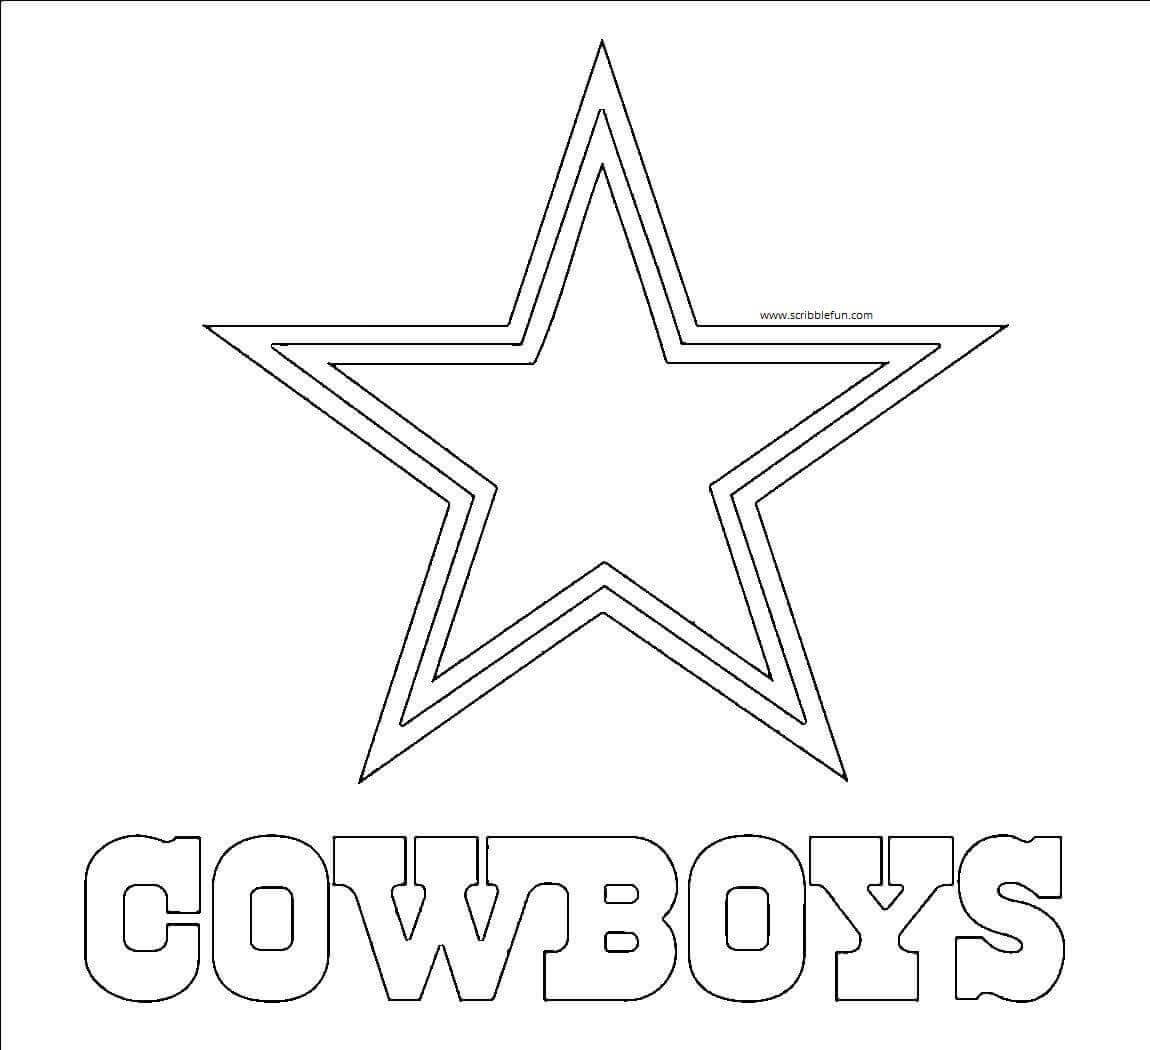 Dallas Cowboys Coloring Pages To Print
 30 Free NFL Coloring Pages Printable